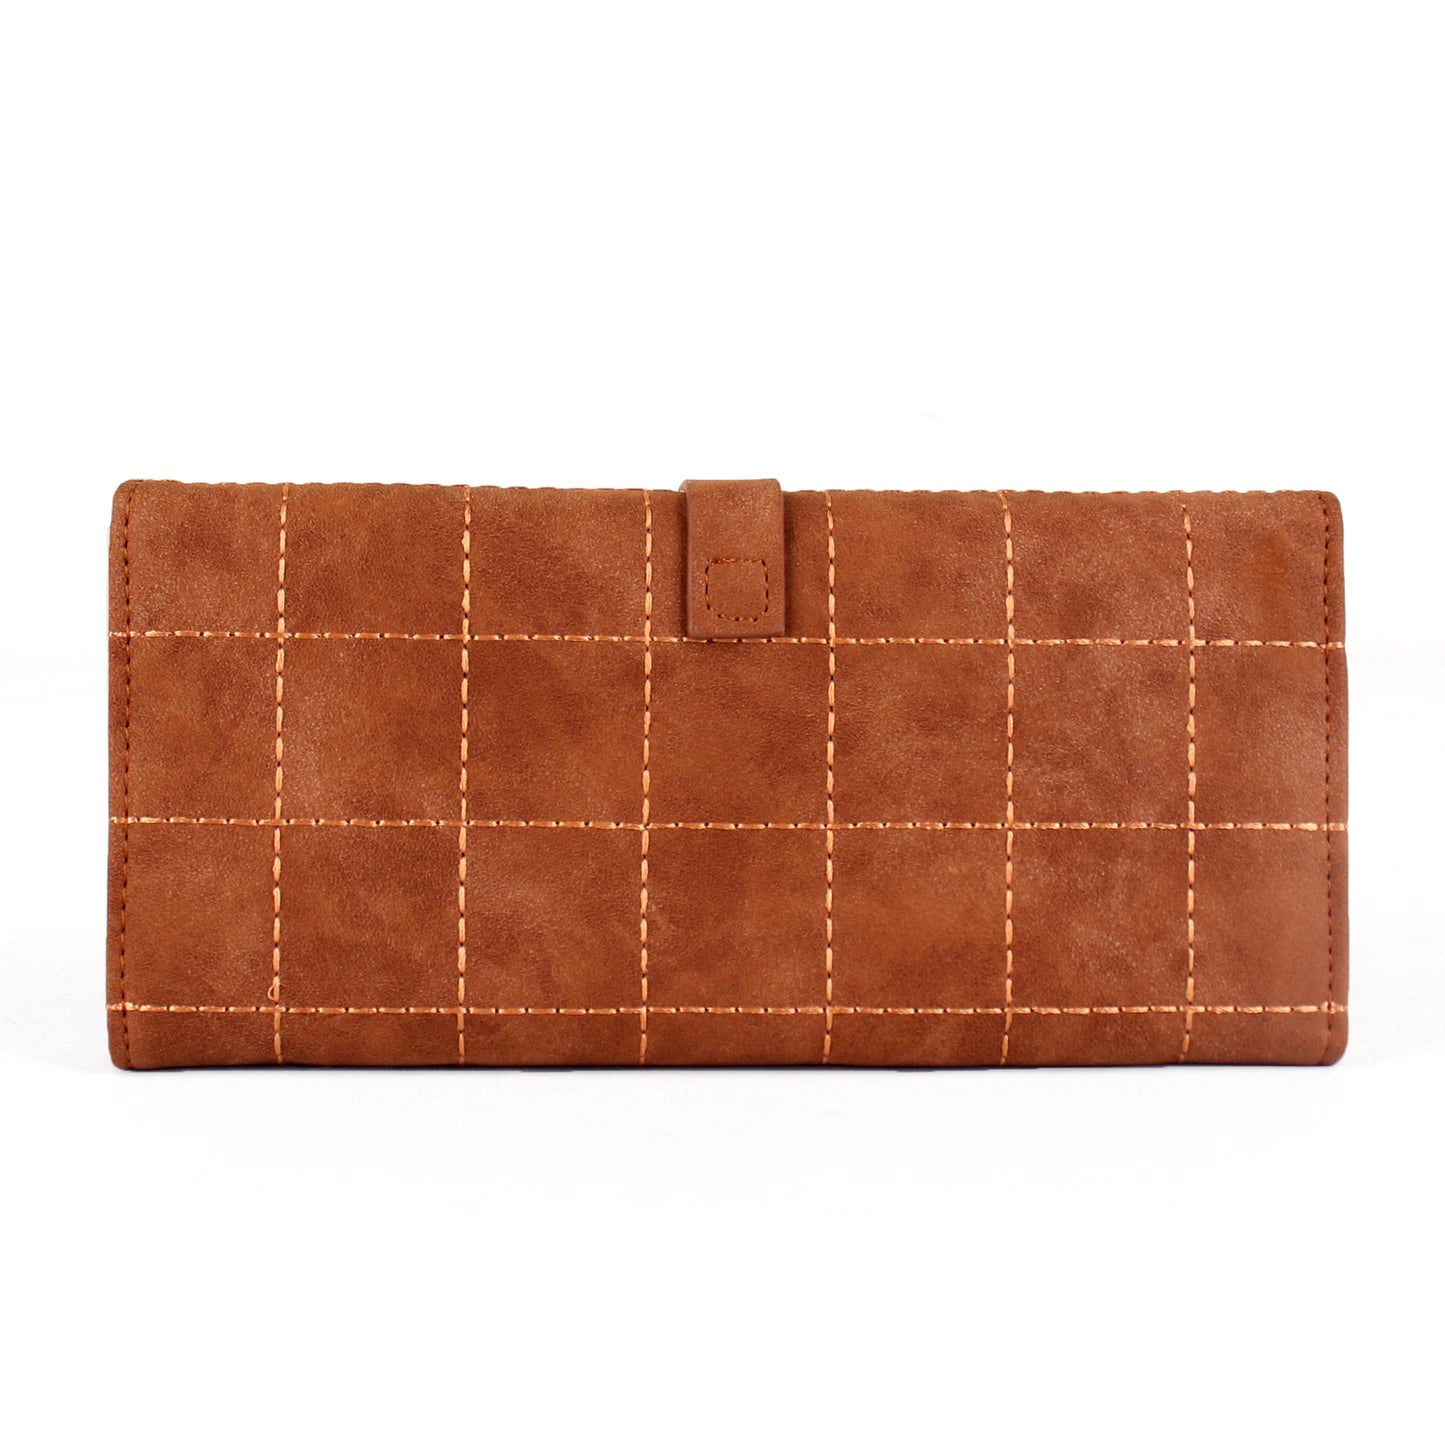 The Boxy Clamped Wallet in Brown